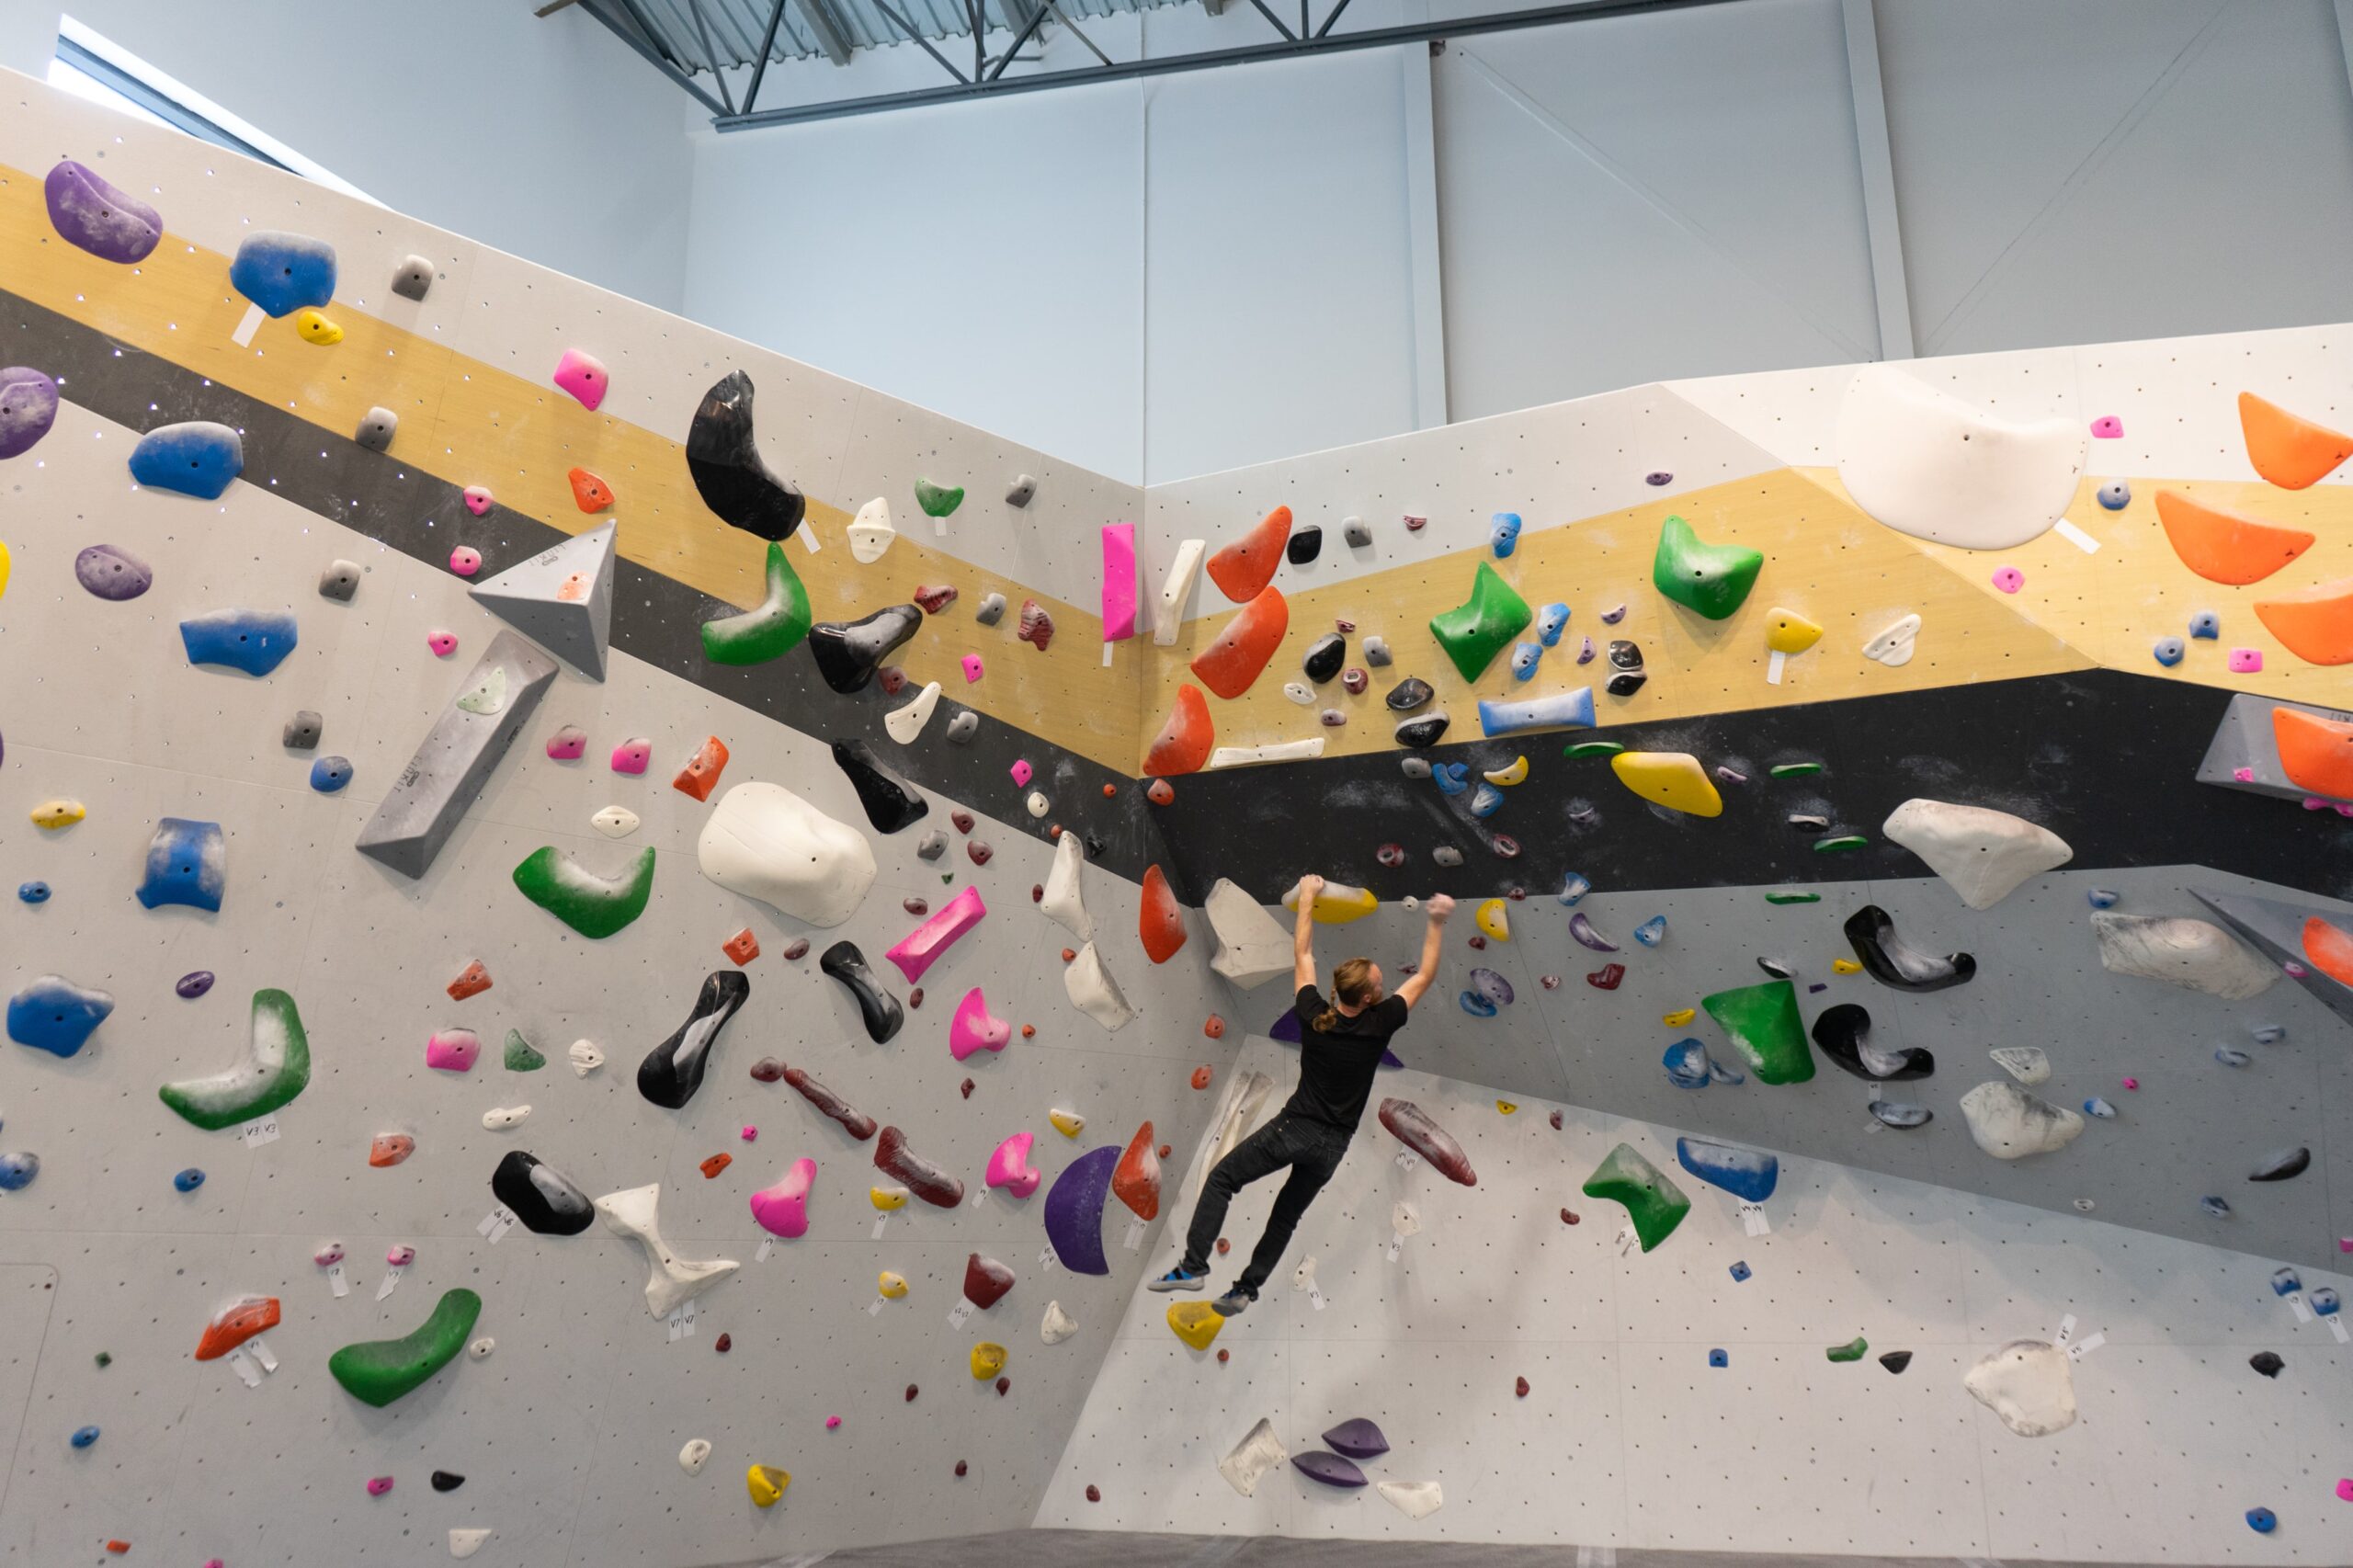 A person scaling a rock wall in an indoor climbing gym, demonstrating strength and determination.